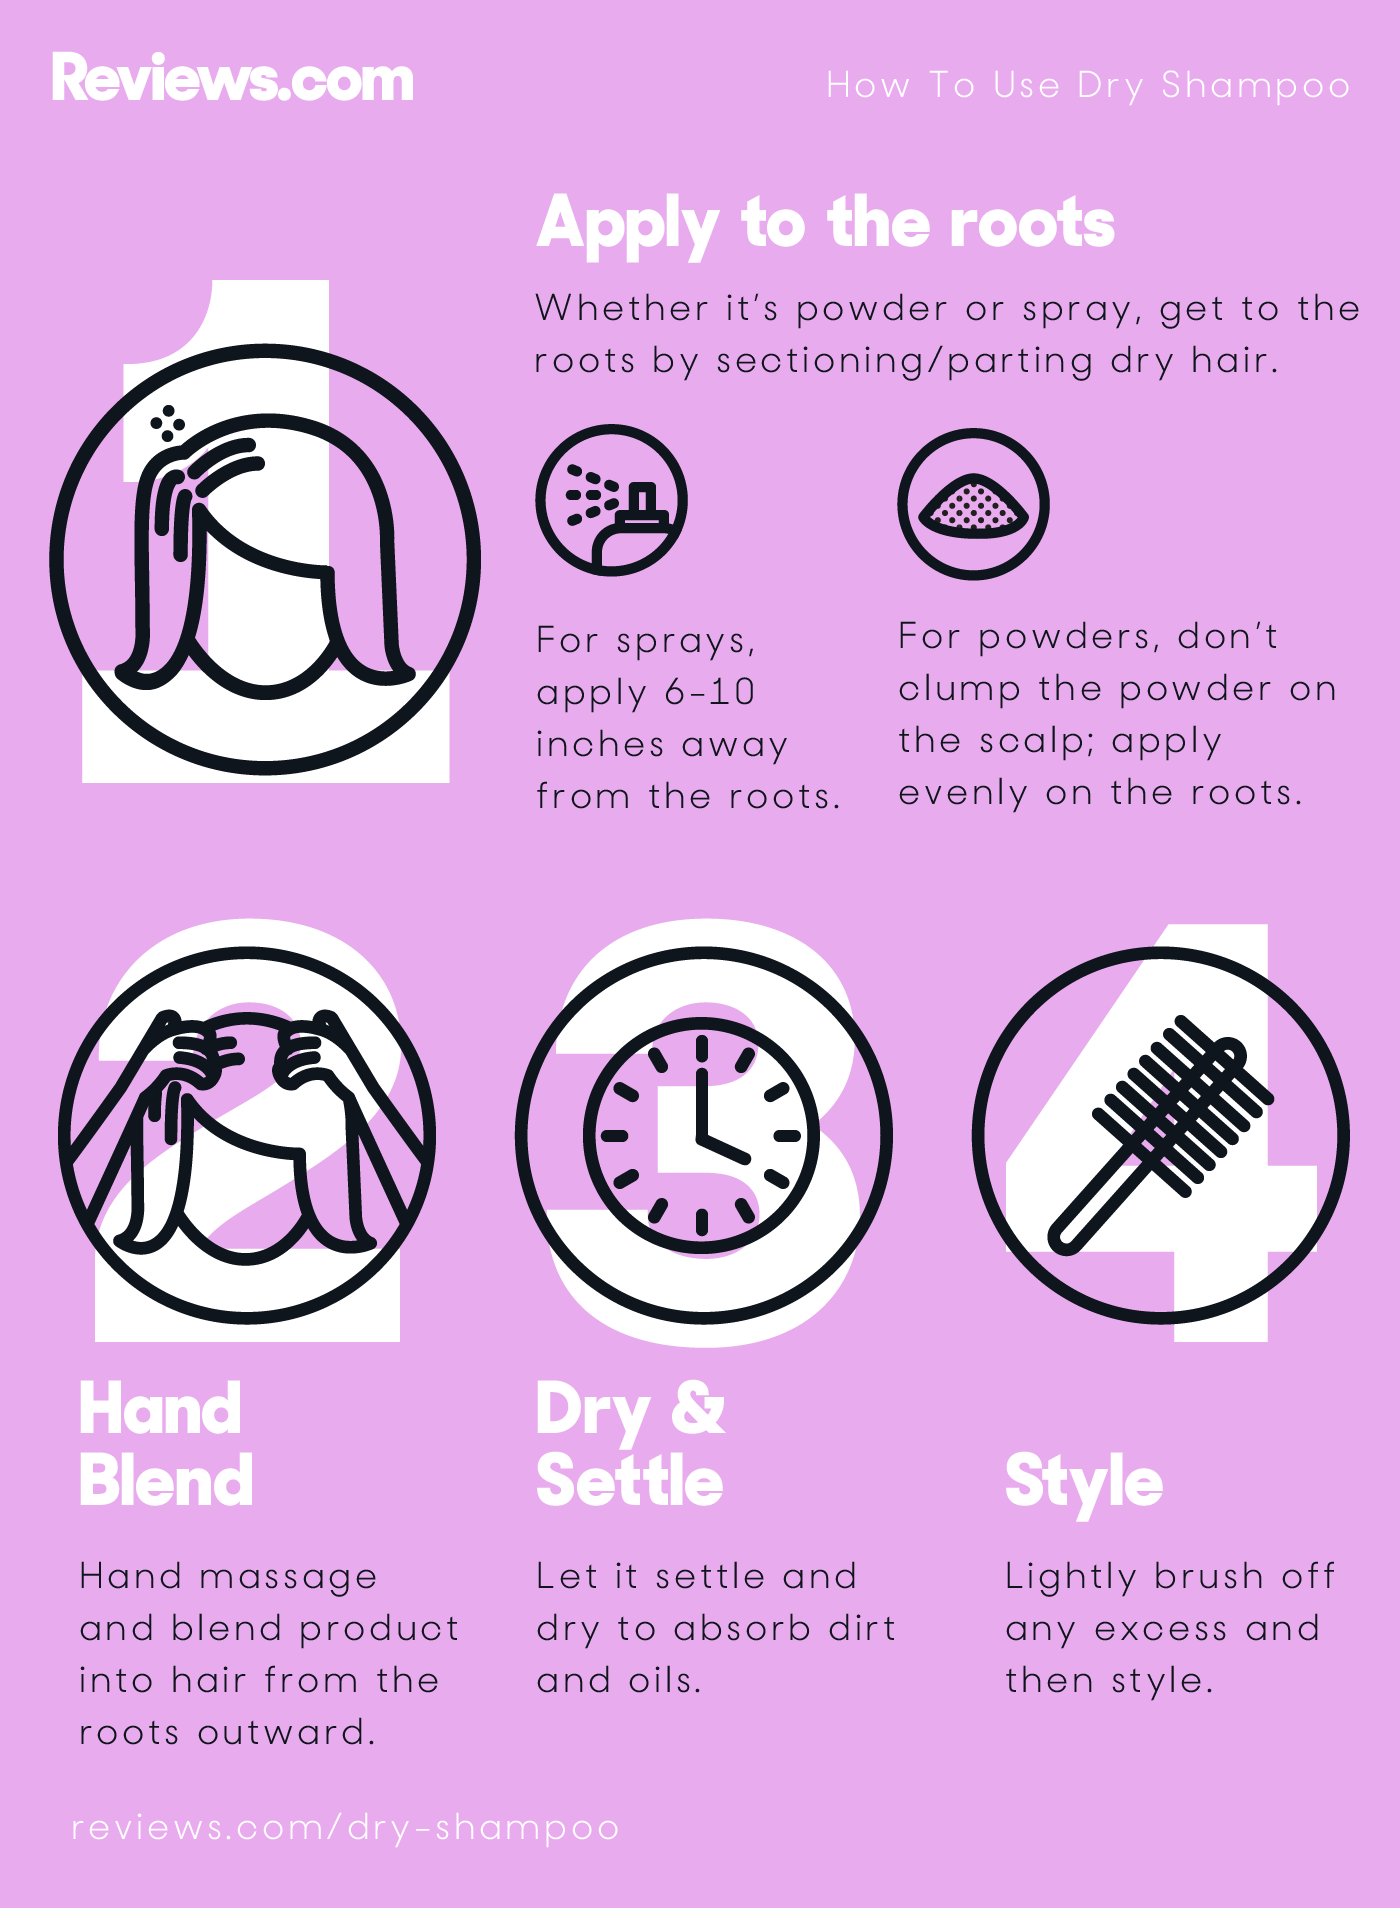 How To Use and Apply Dry Shampoo